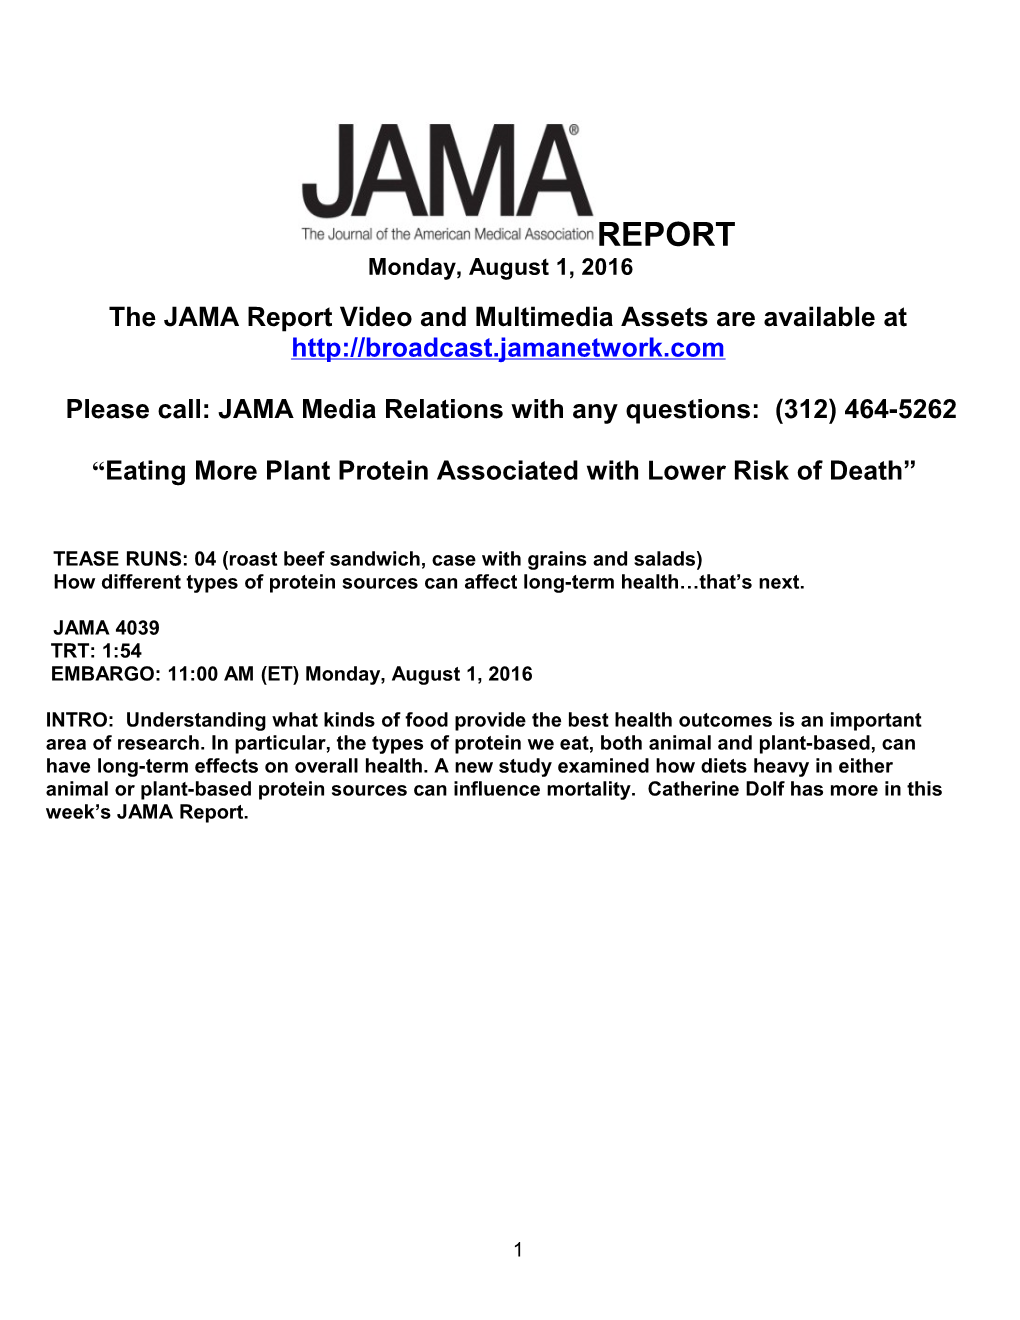 The JAMA Report Video and Multimedia Assets Are Available At